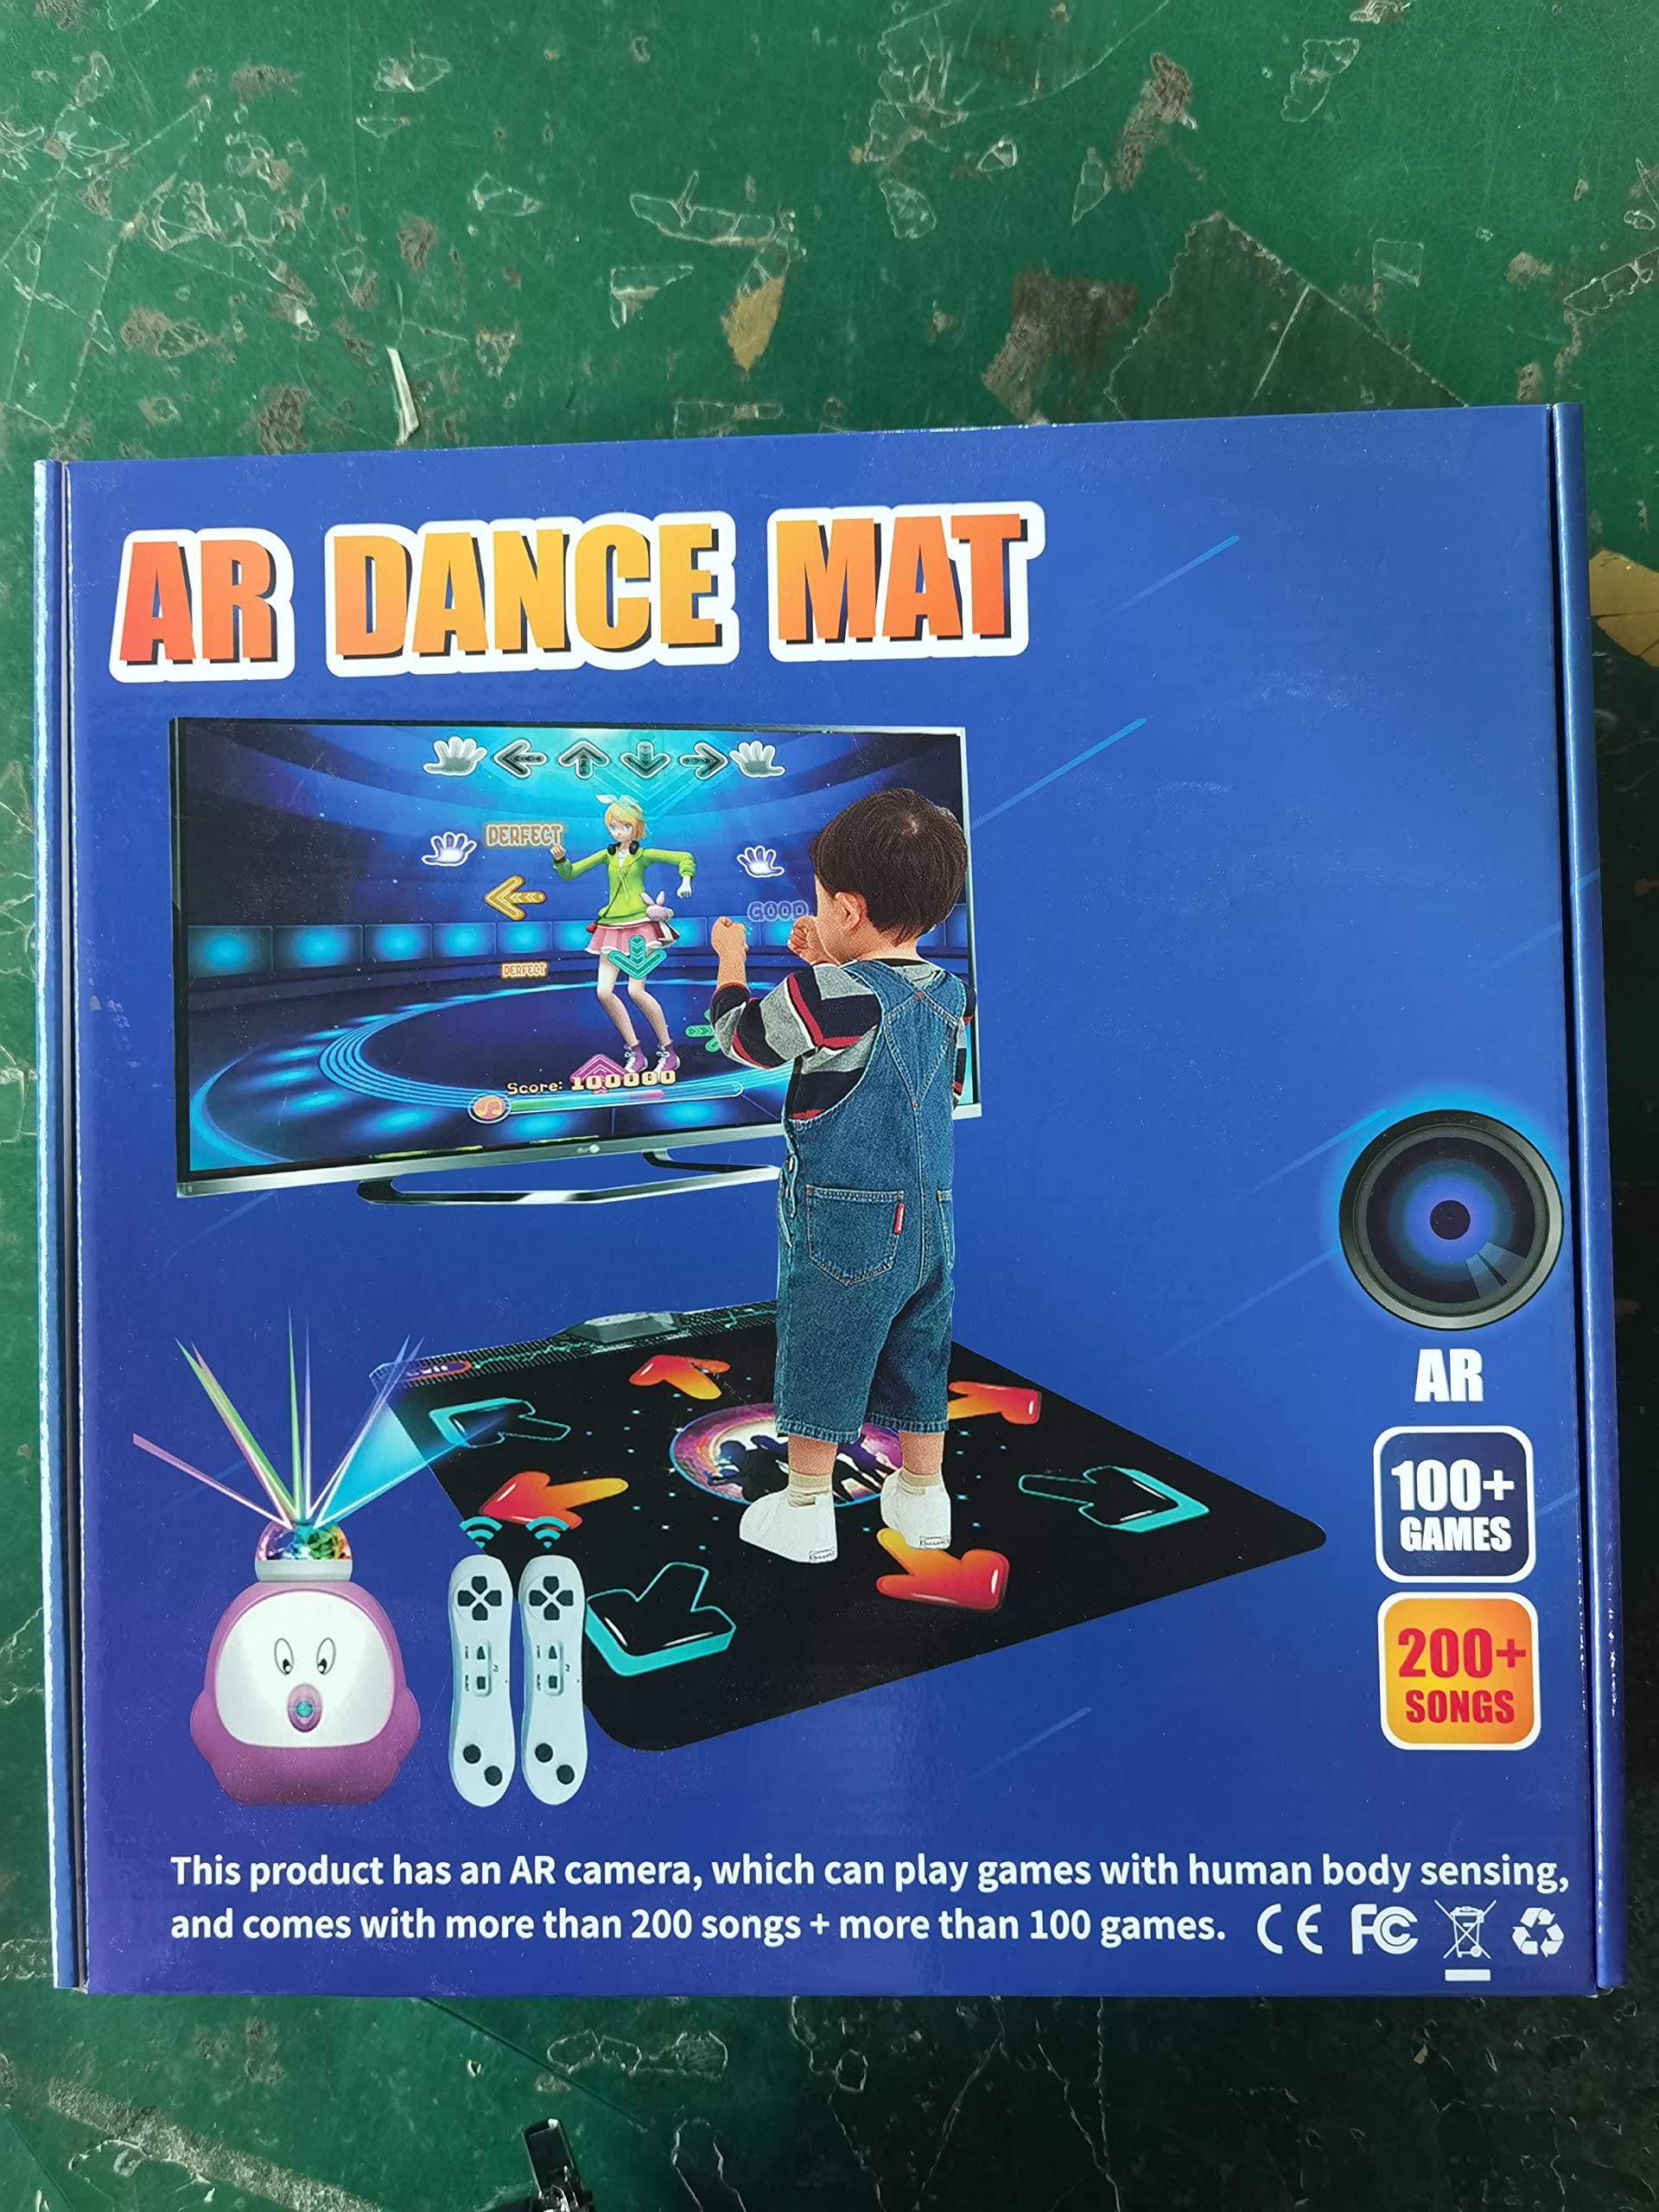 YRPRSODF Dance Mat for Kids and Adults, Musical Electronic Dance Step Pad with 100+ Games, 200+Songs, HD Camera, HDMI, 2 Motion Sensor Controllers, MTV & Cartoon Modes, Toy Gift for Girls& Boys age 3+